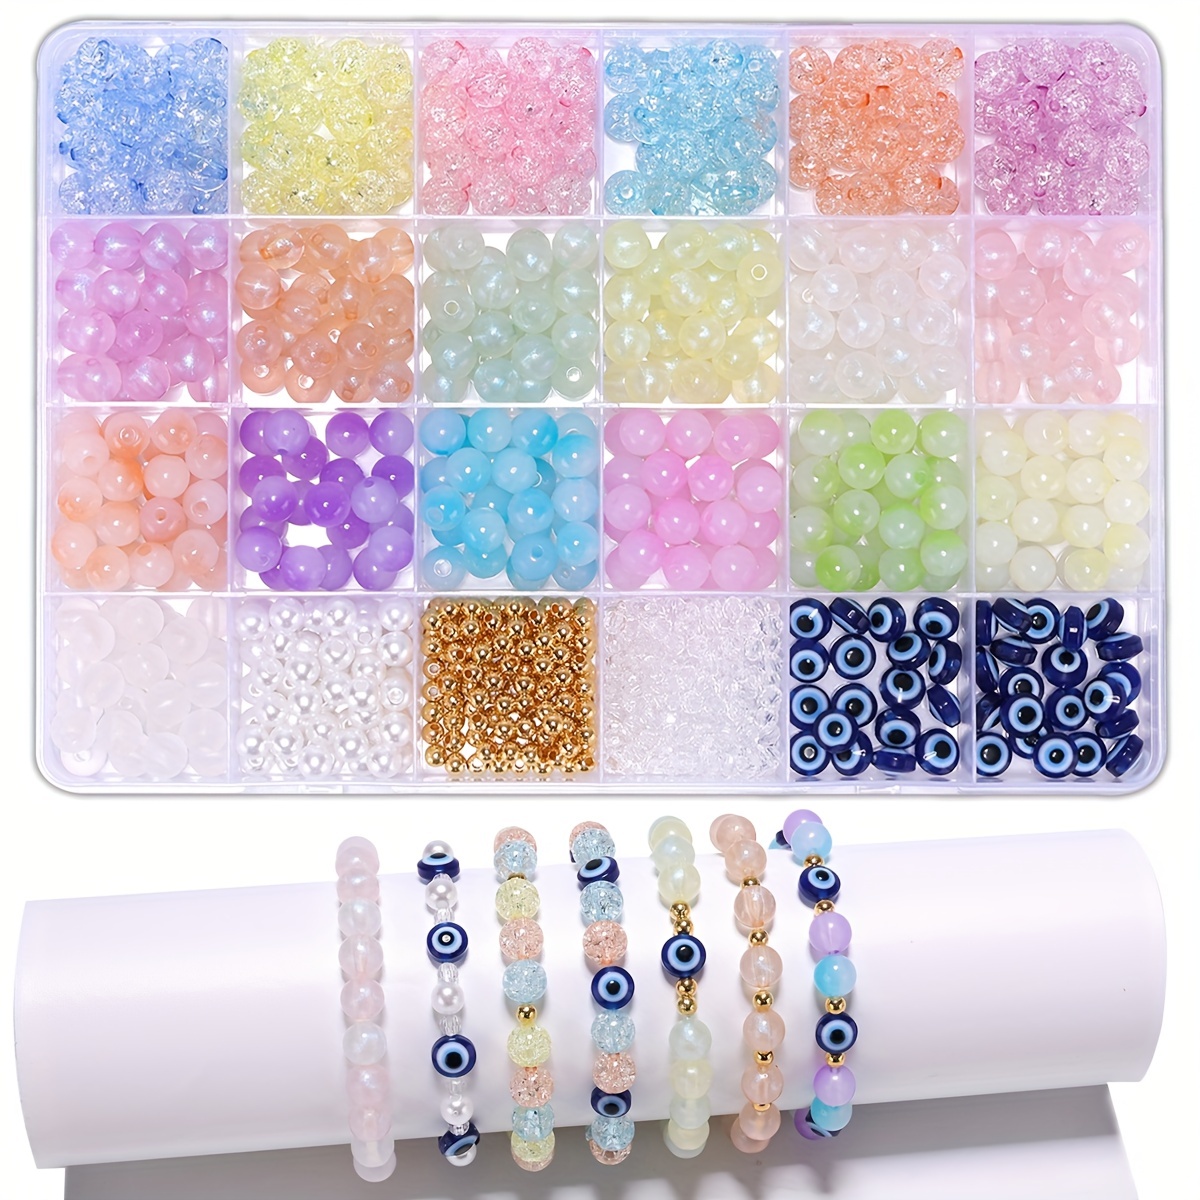 PAXCOO 720pcs 8mm Glass Beads for Jewelry Making, 24 Colors Glass Beads Kit  for Bracelet Making, Round Loose Beads for Bracelet Earring Necklace